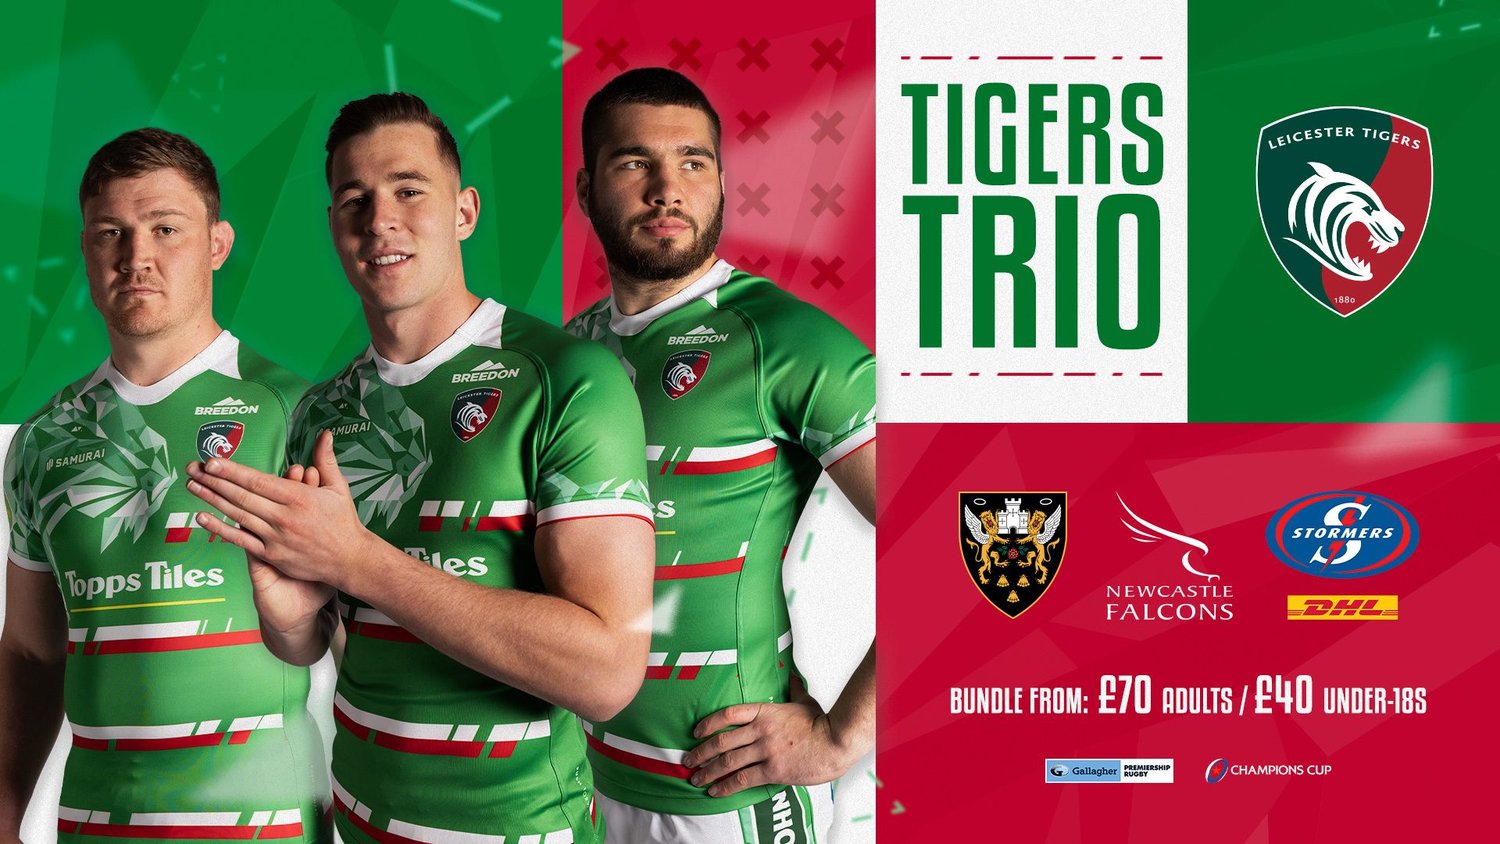 Leicester Tigers - Tigers Trio